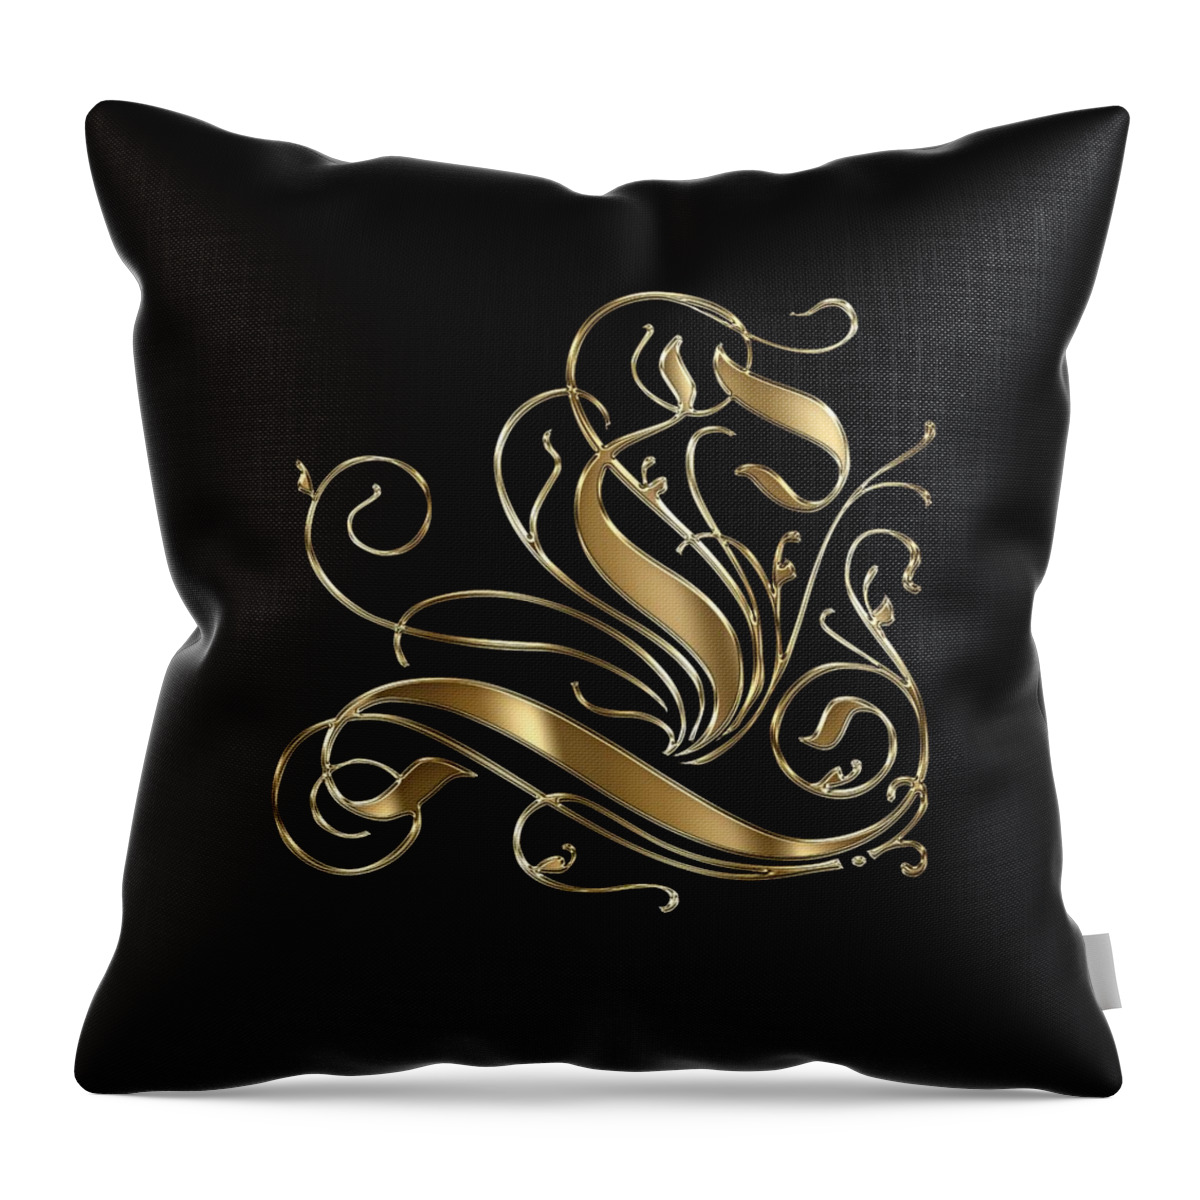 Golden Letter L Throw Pillow featuring the painting L Golden Ornamental Letter Typography by Georgeta Blanaru